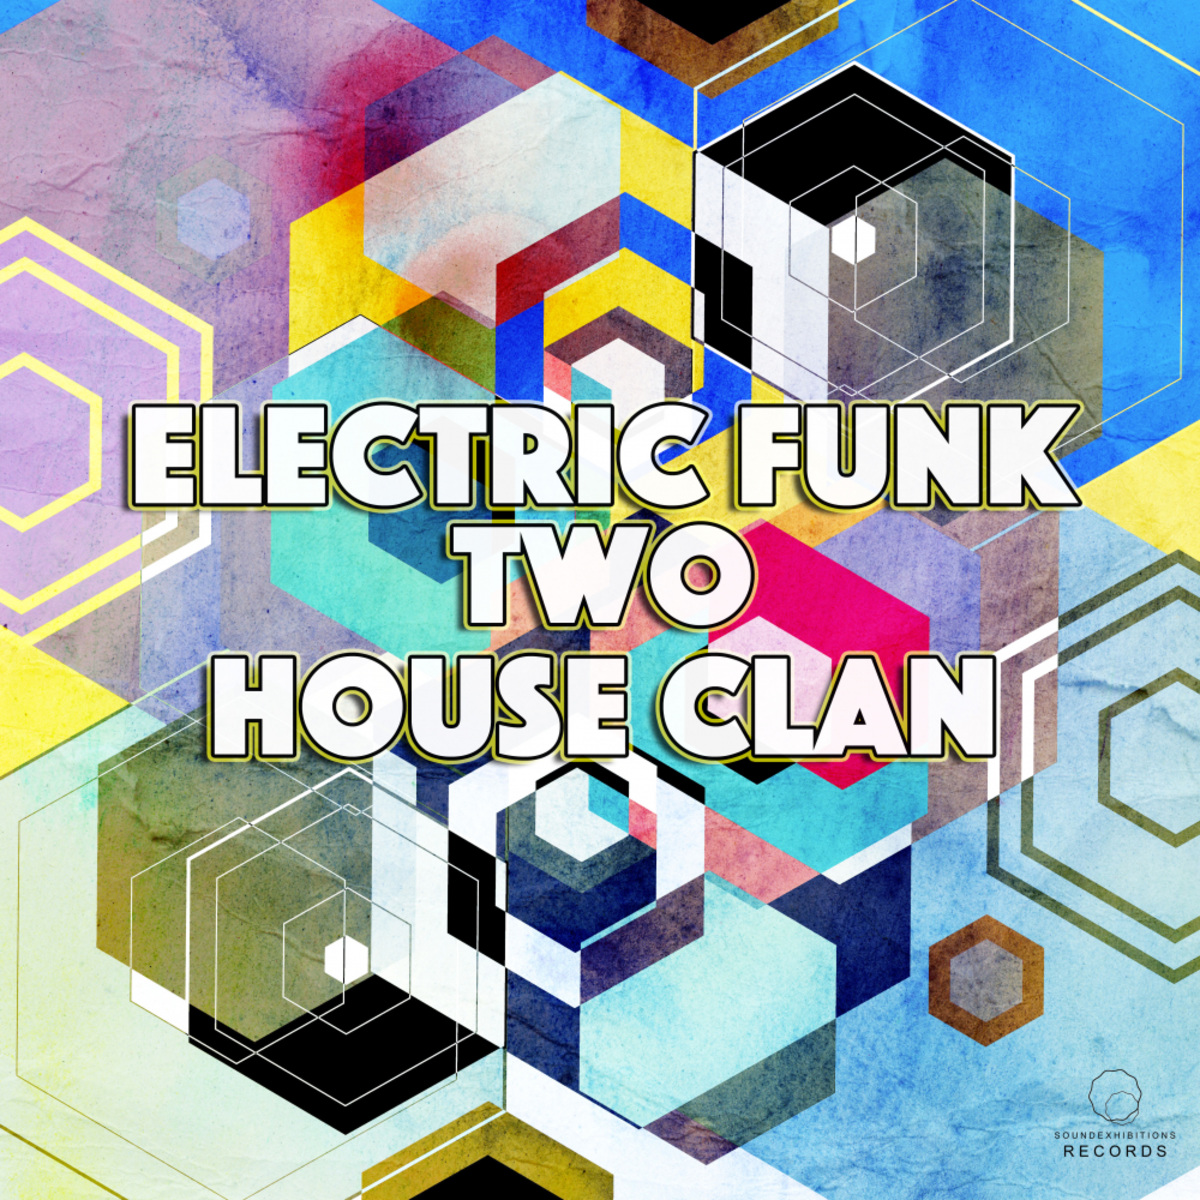 House Clan - Electric Funk Two / Sound-Exhibitions-Records